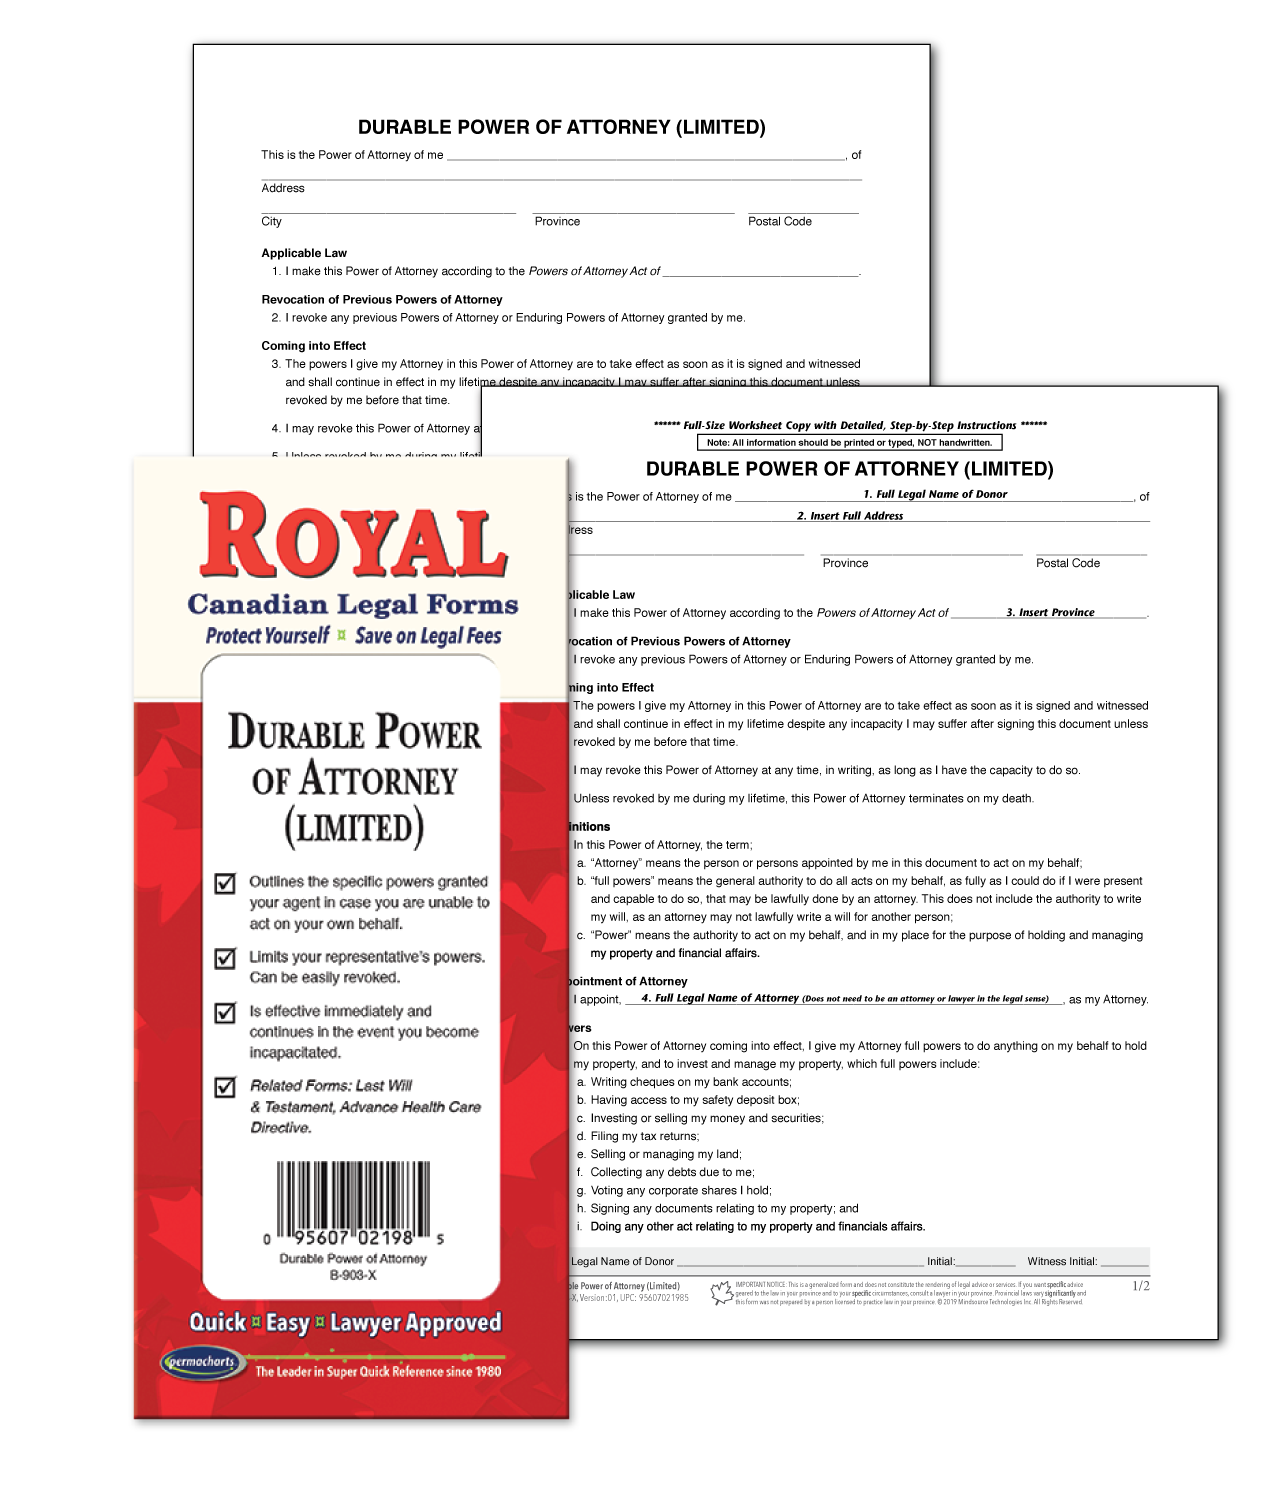 canadian-legal-forms-durable-power-of-attorney-legal-forms-kit